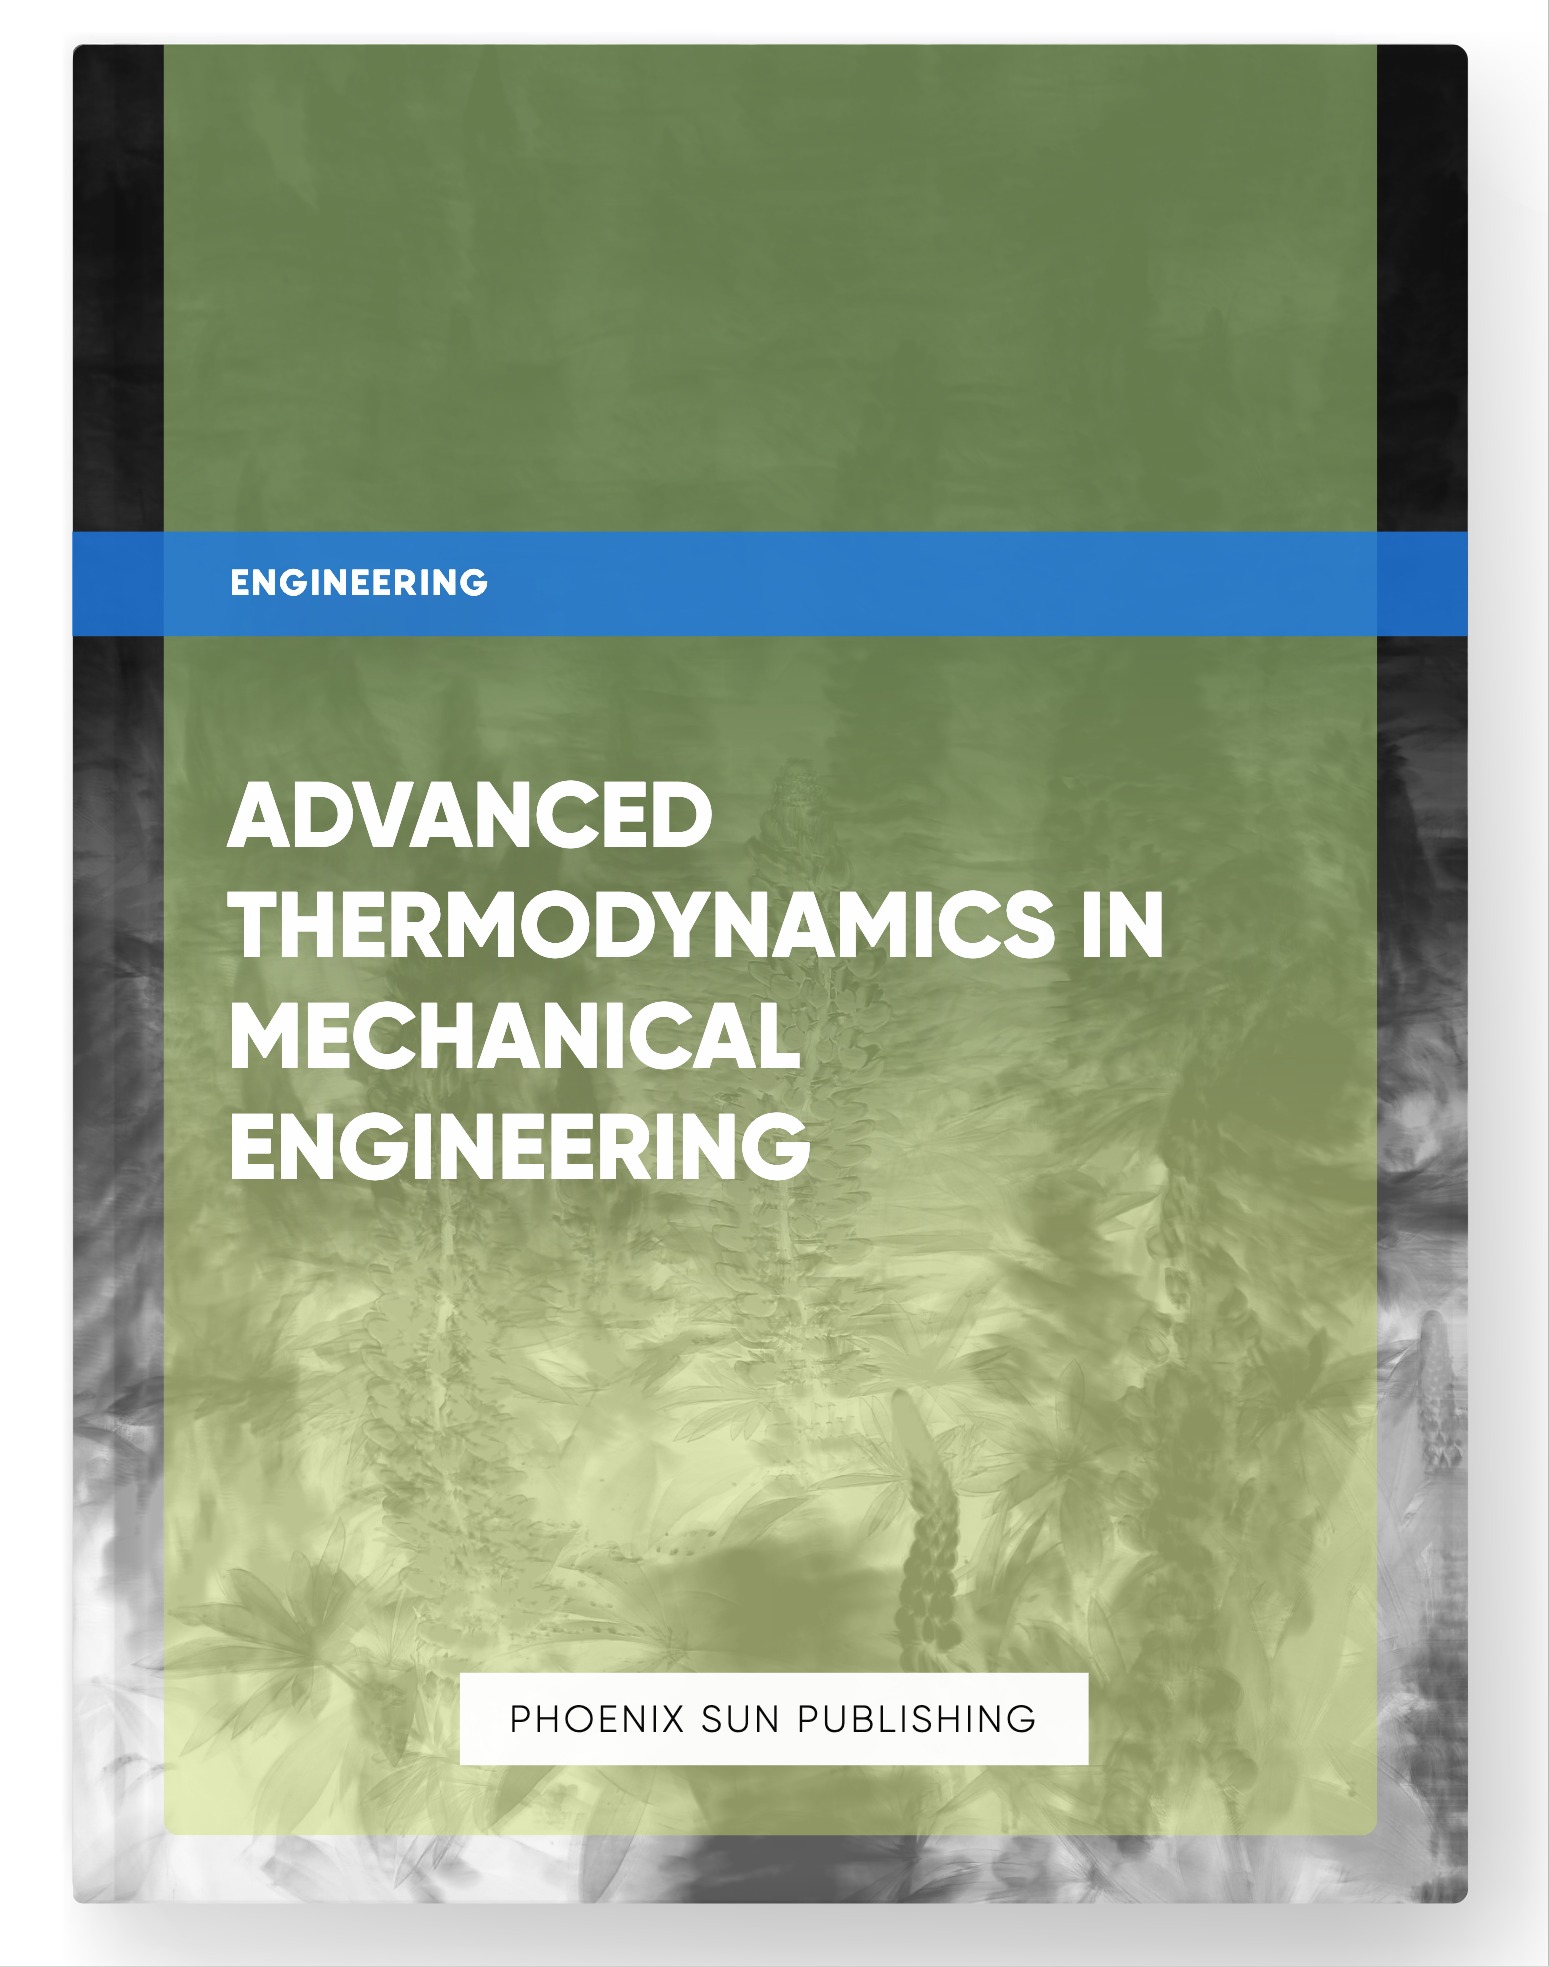 Advanced Thermodynamics in Mechanical Engineering